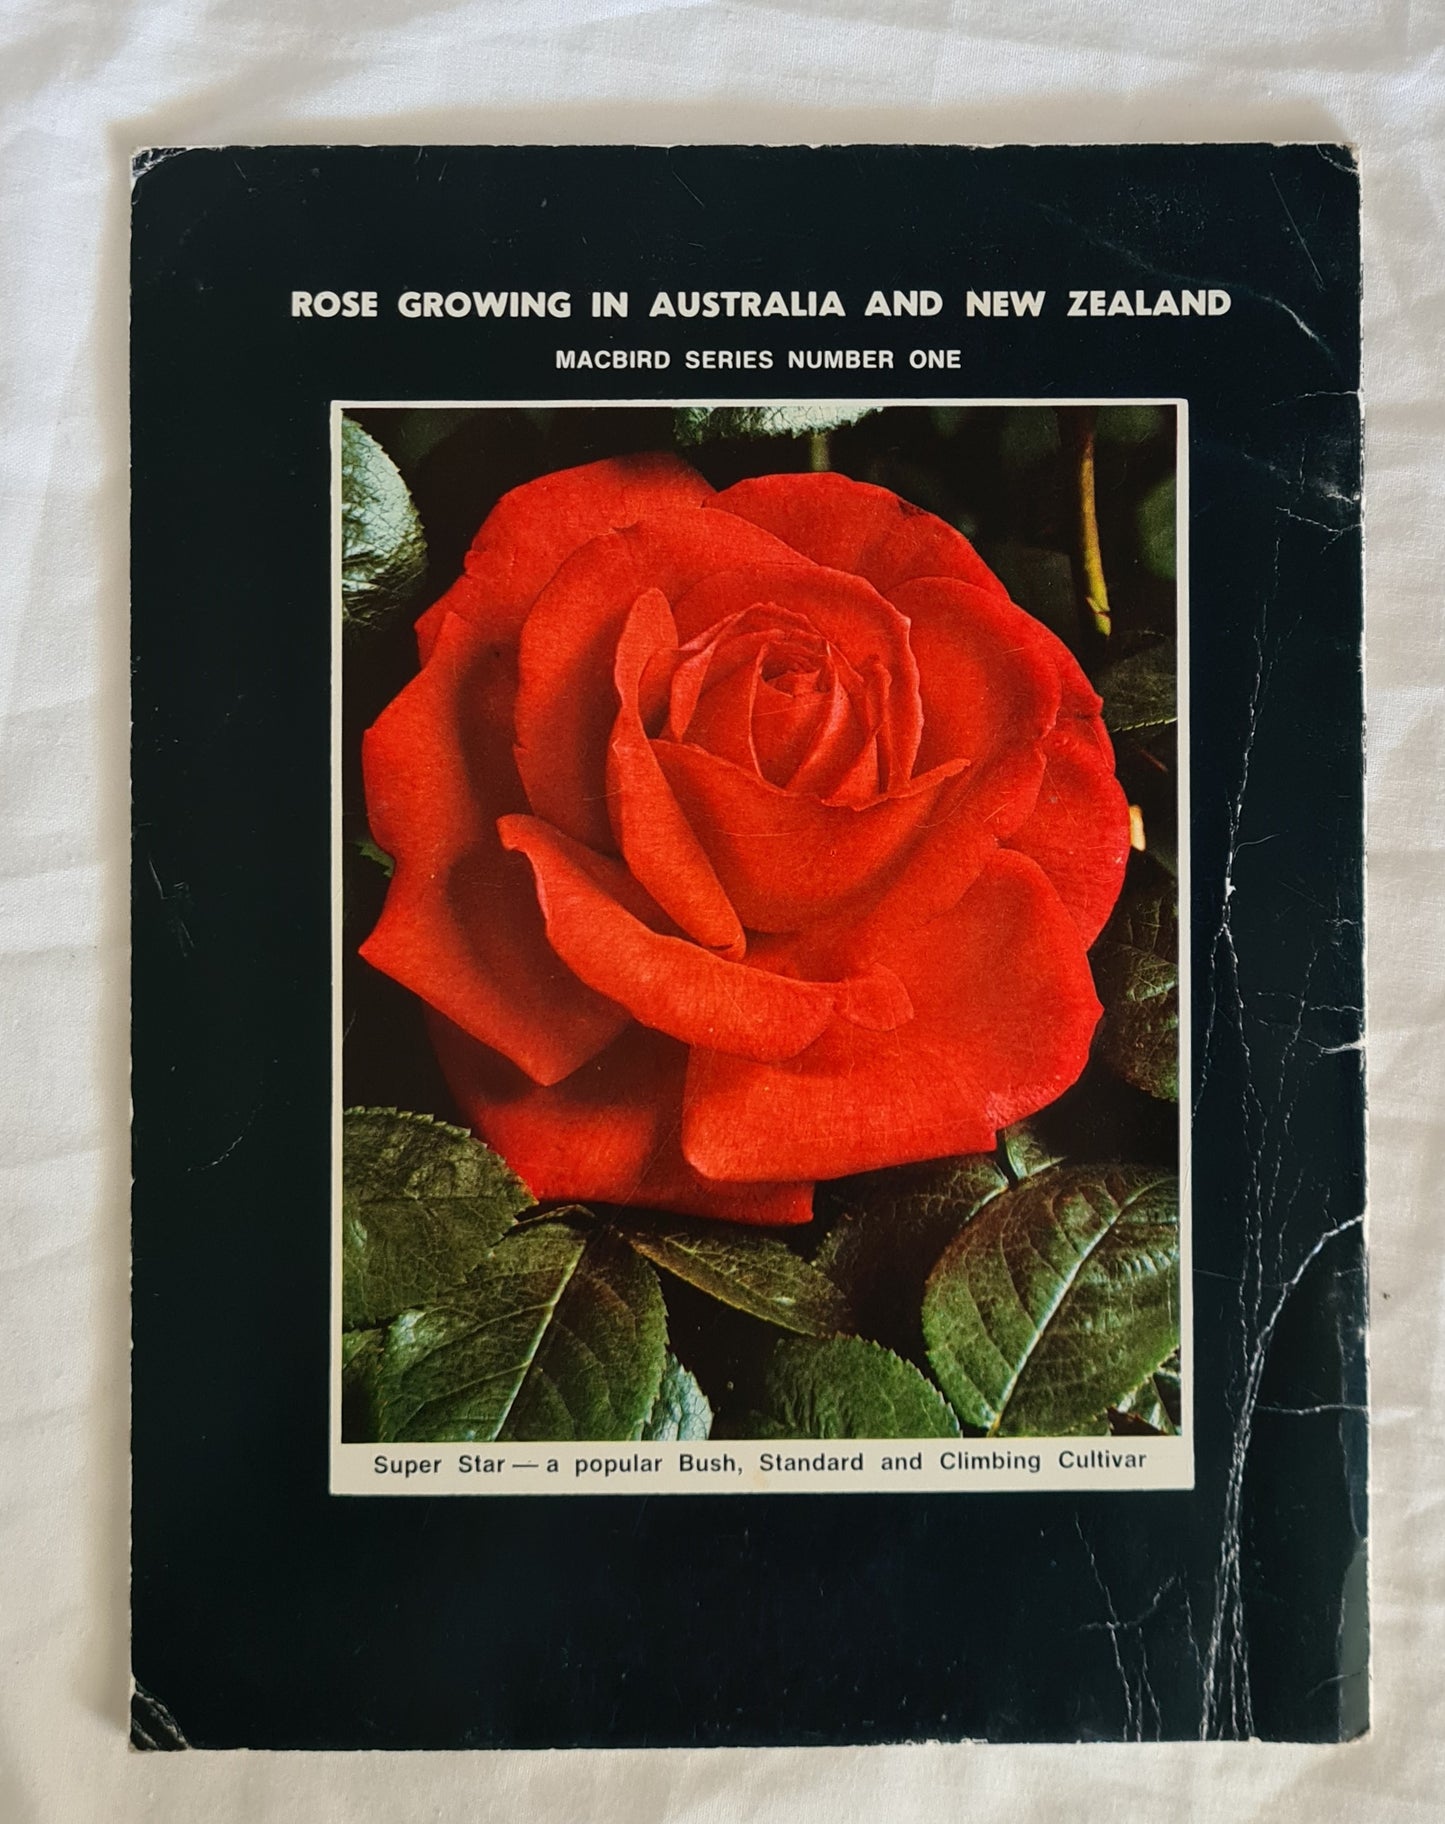 Rose Growing in Australia and New Zealand by Macbird Horticultural Enterprises